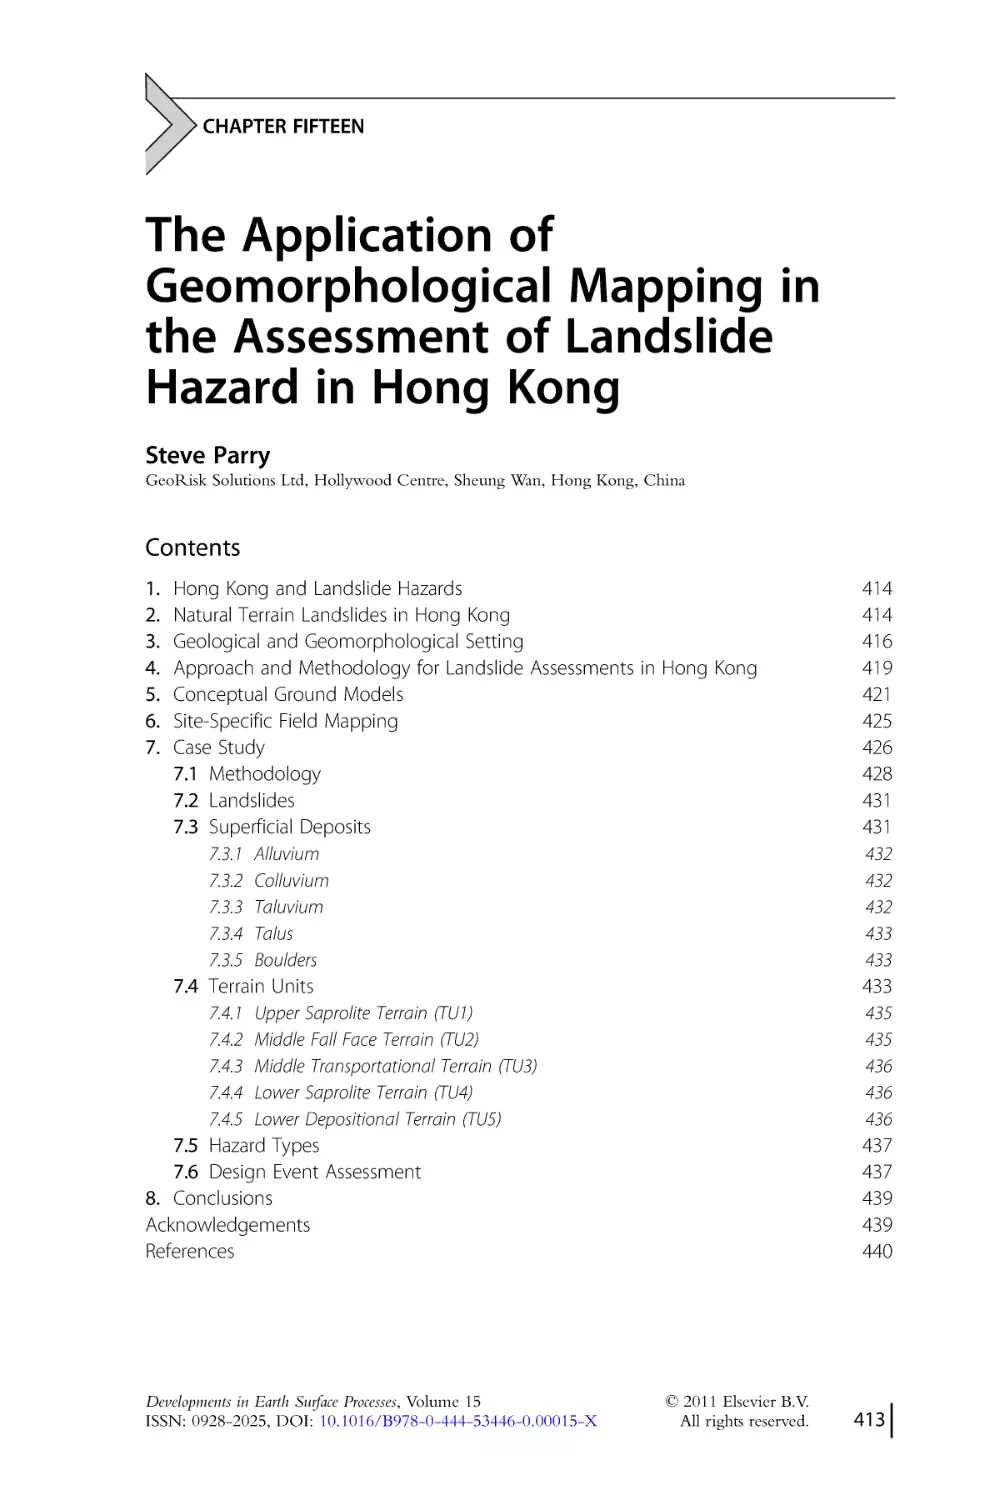 CHAPTER FIFTEEN.
The Application of
Geomorphological Mapping in
the Assessment of Landslide
Hazard in Hong Kong